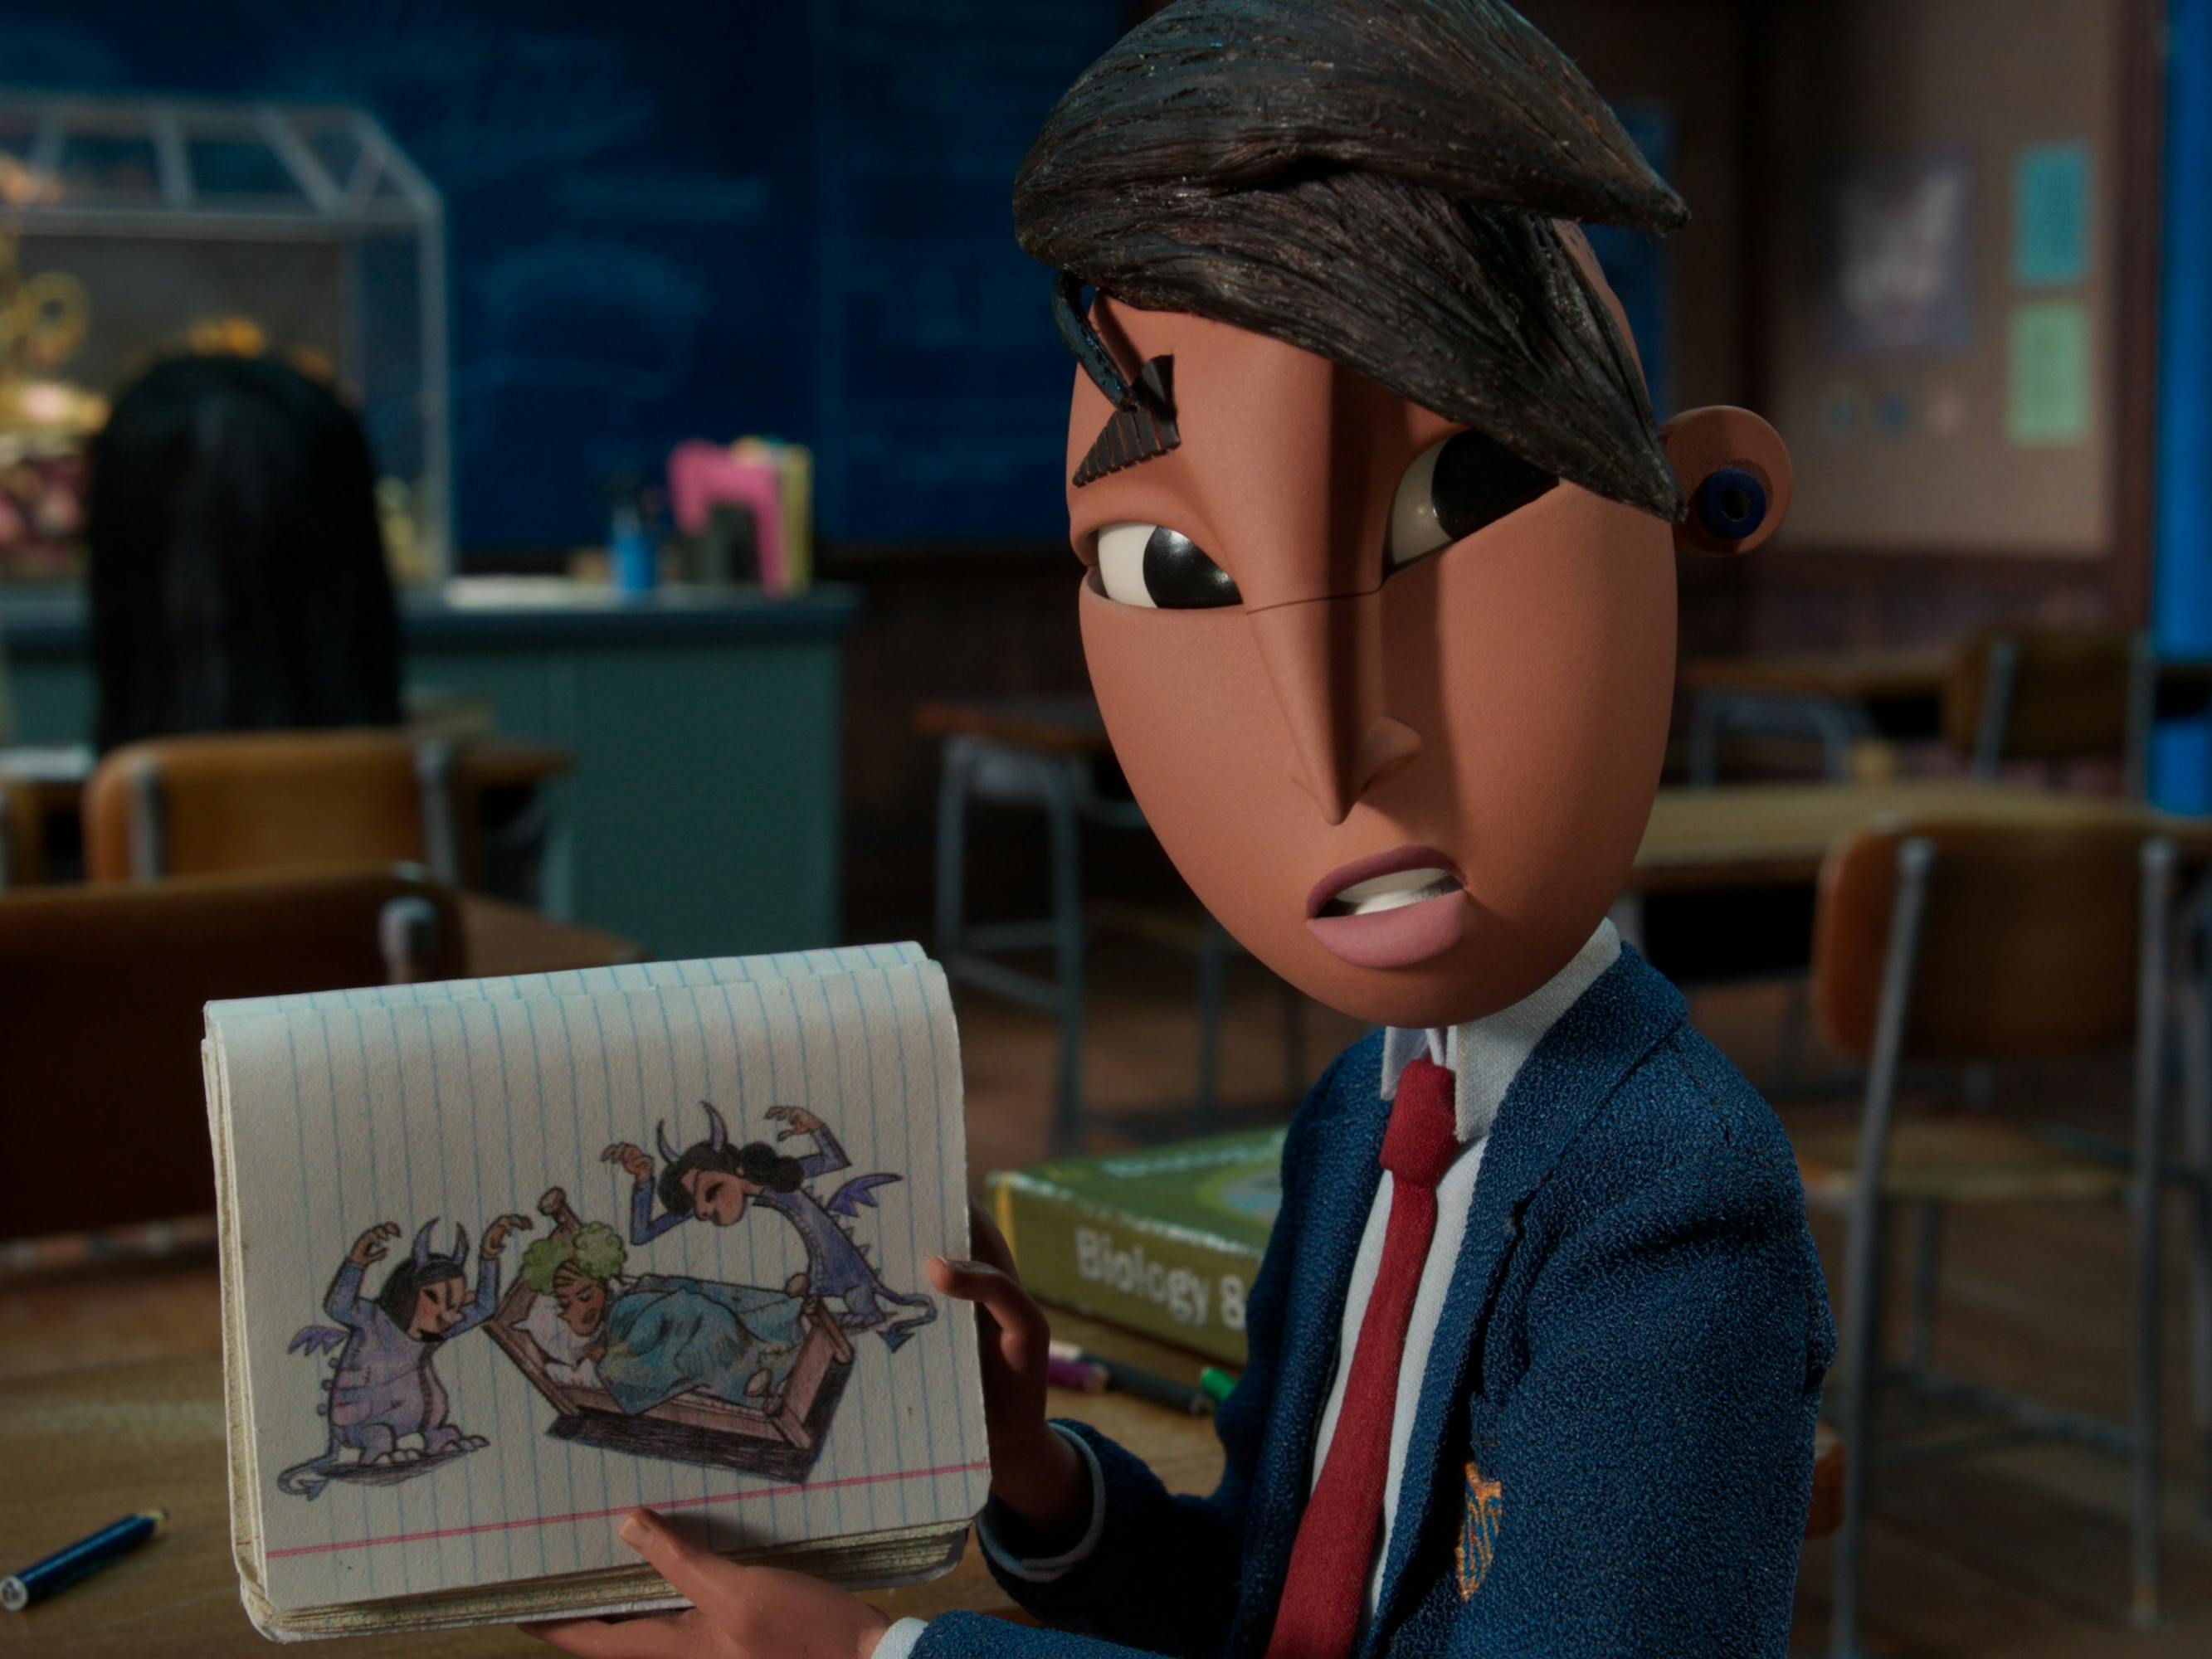  Raúl (Sam Zelaya) shows a drawing of two figures hovering over a blue-blanketed bed. 